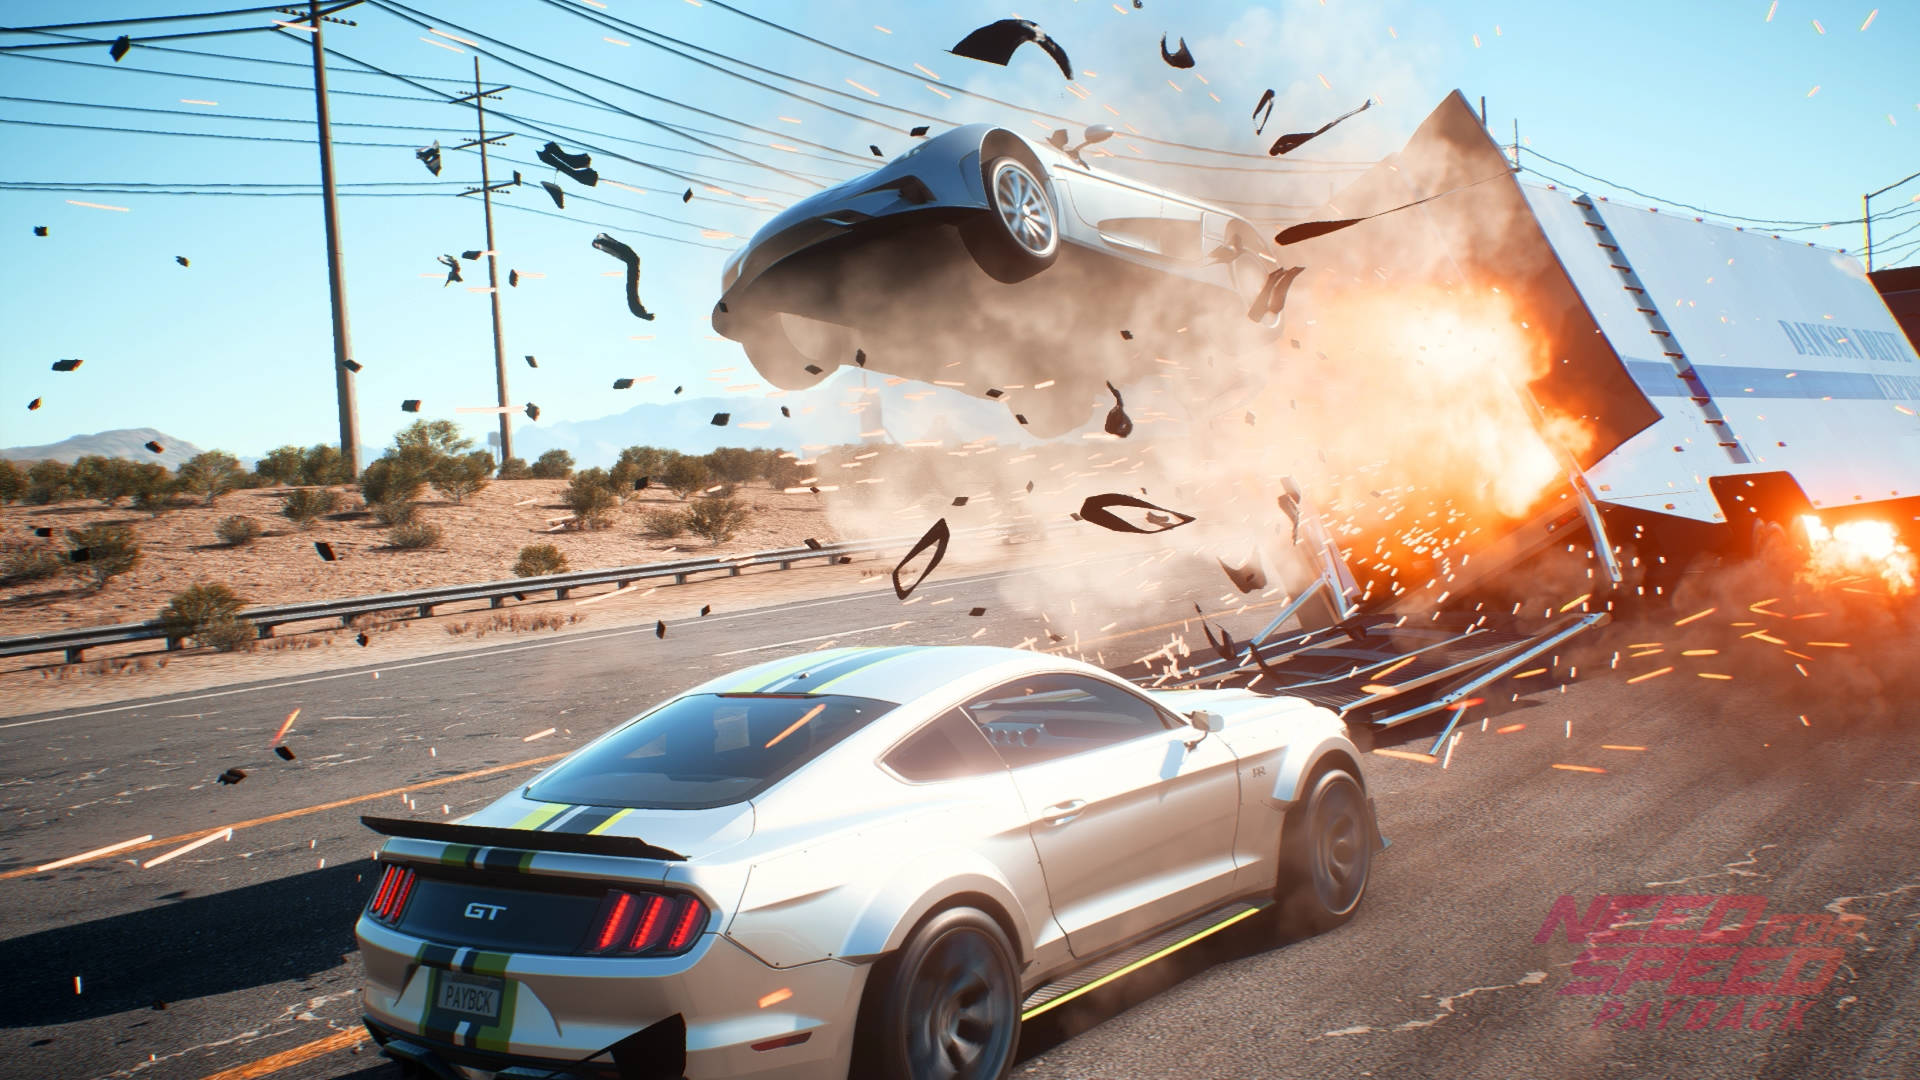 Thrilling Action in Need for Speed Payback - Car Crashing Scene Wallpaper